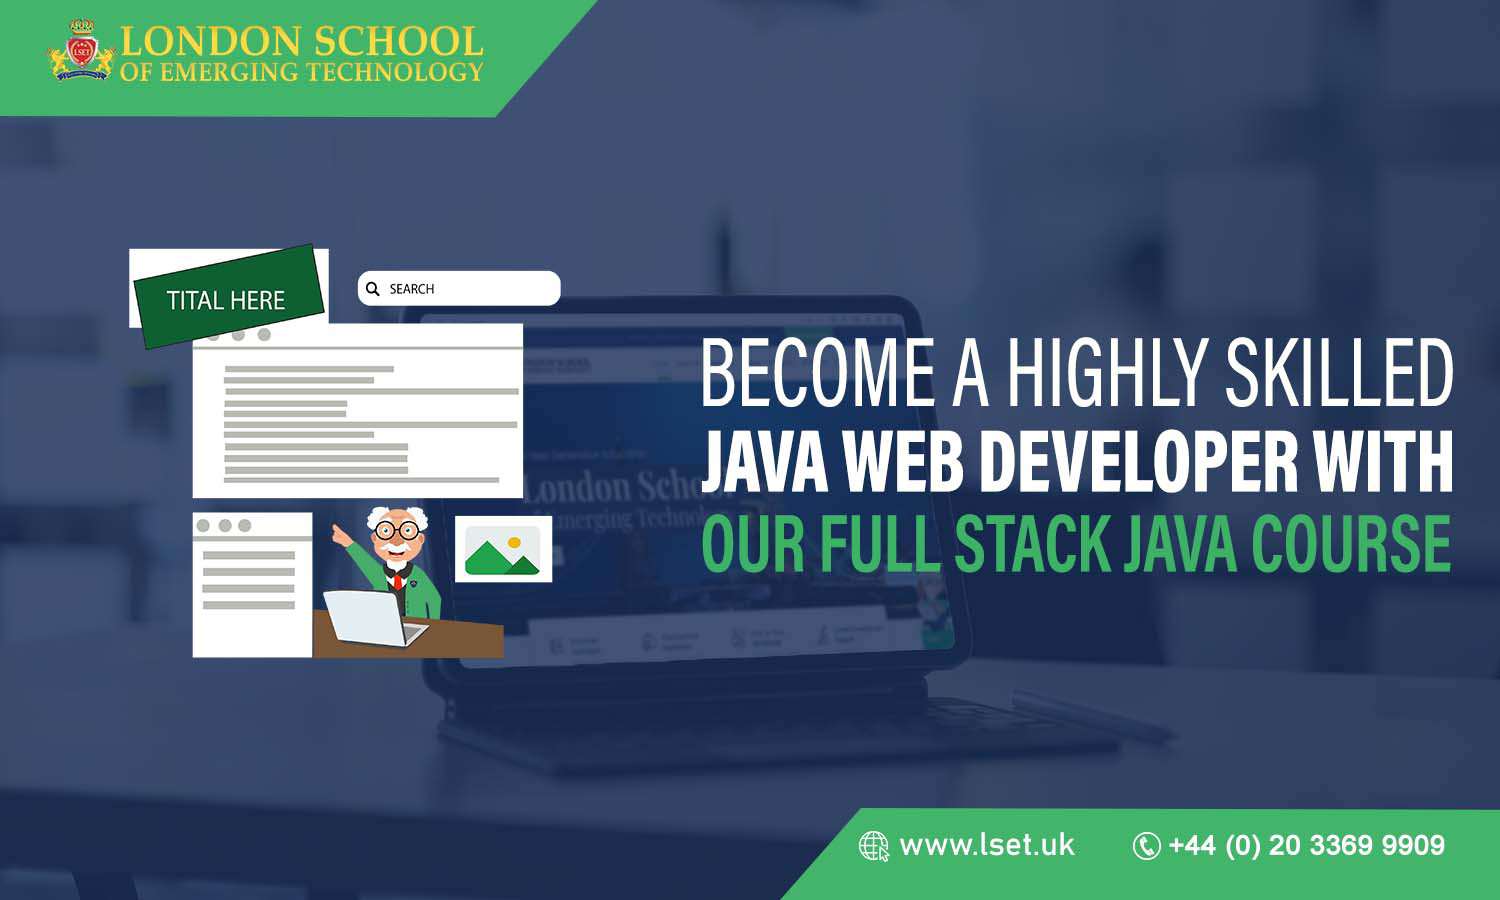 Become a Highly Skilled Java Web Developer with our Full Stack Java Course